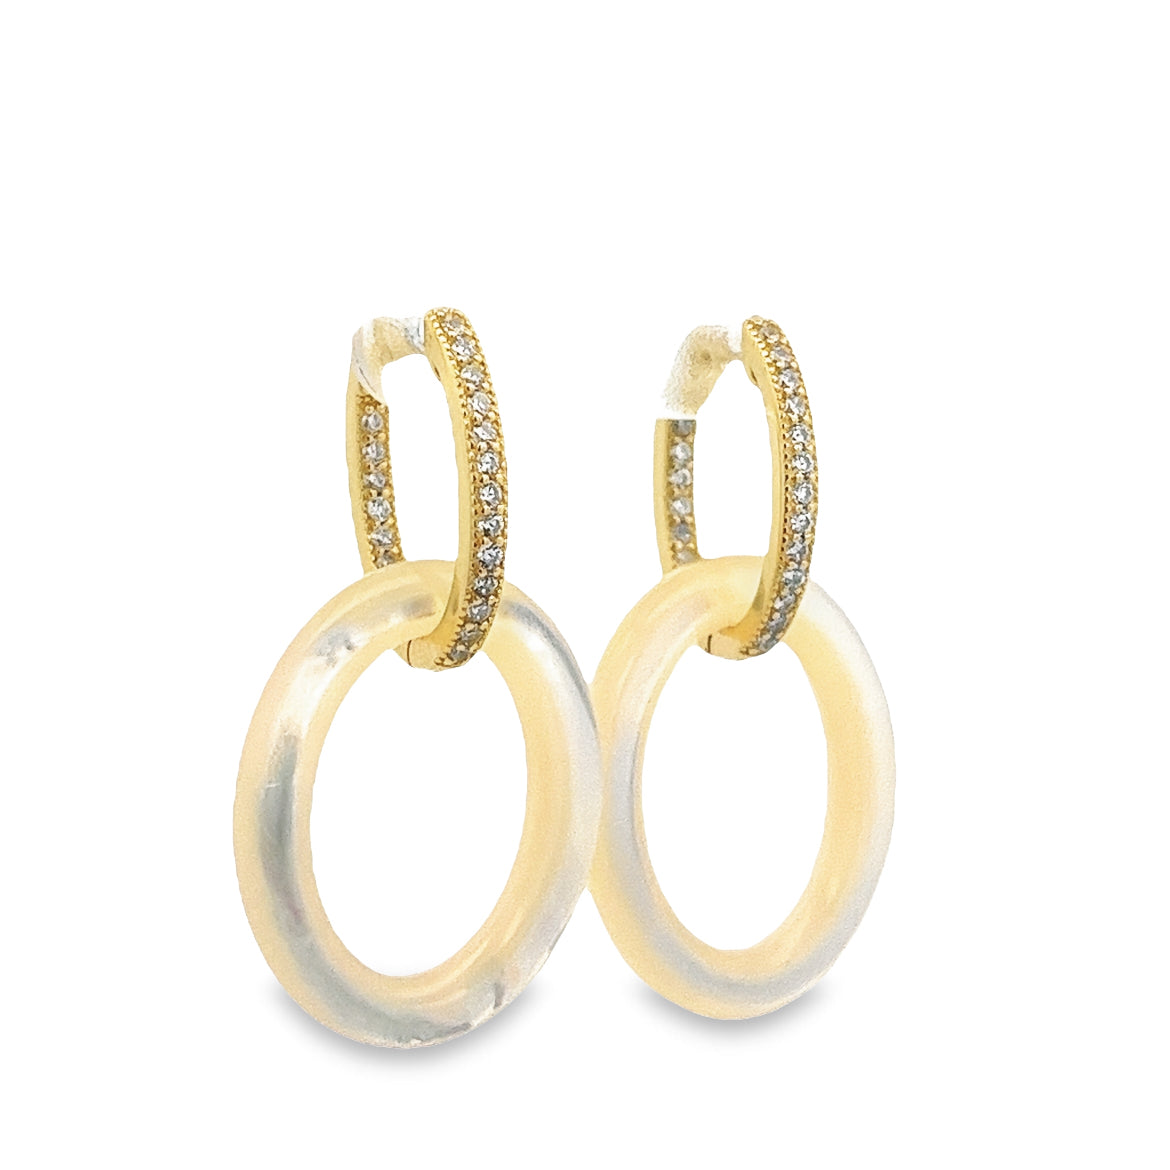 925 SILVER GOLD PLATED HOOPS EARRINGS WITH MOTHER OF PEARL